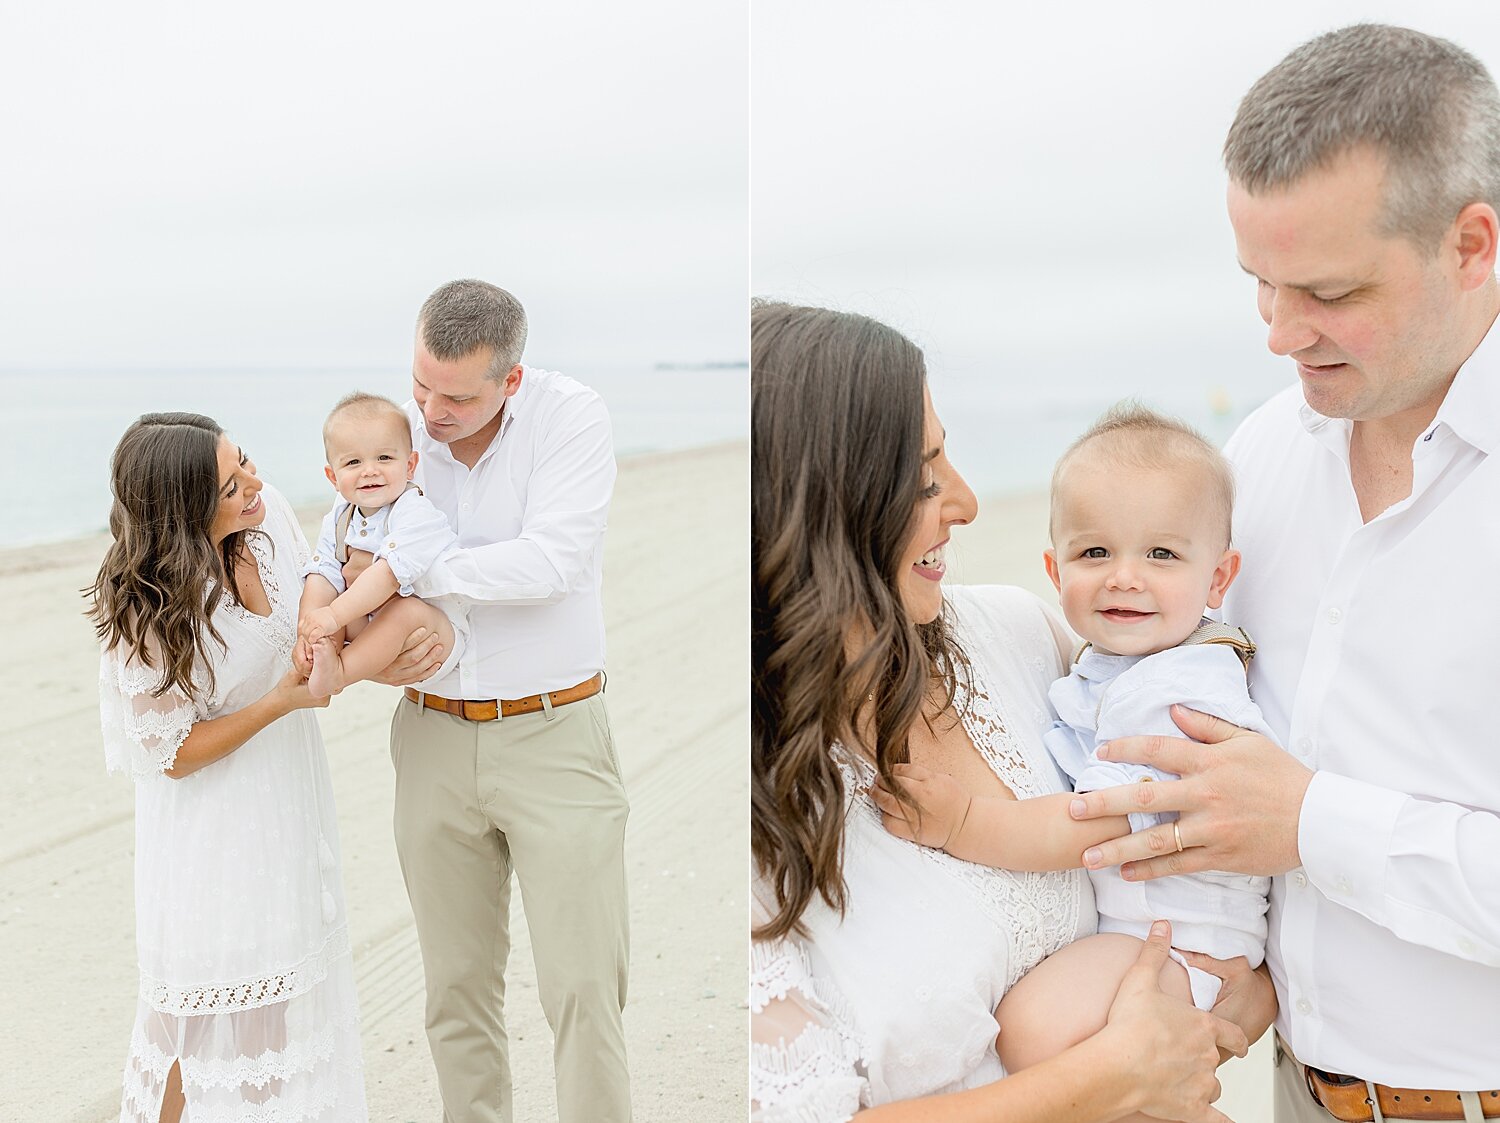 Mom and dad with their son on the beach | Kristin Wood Photography